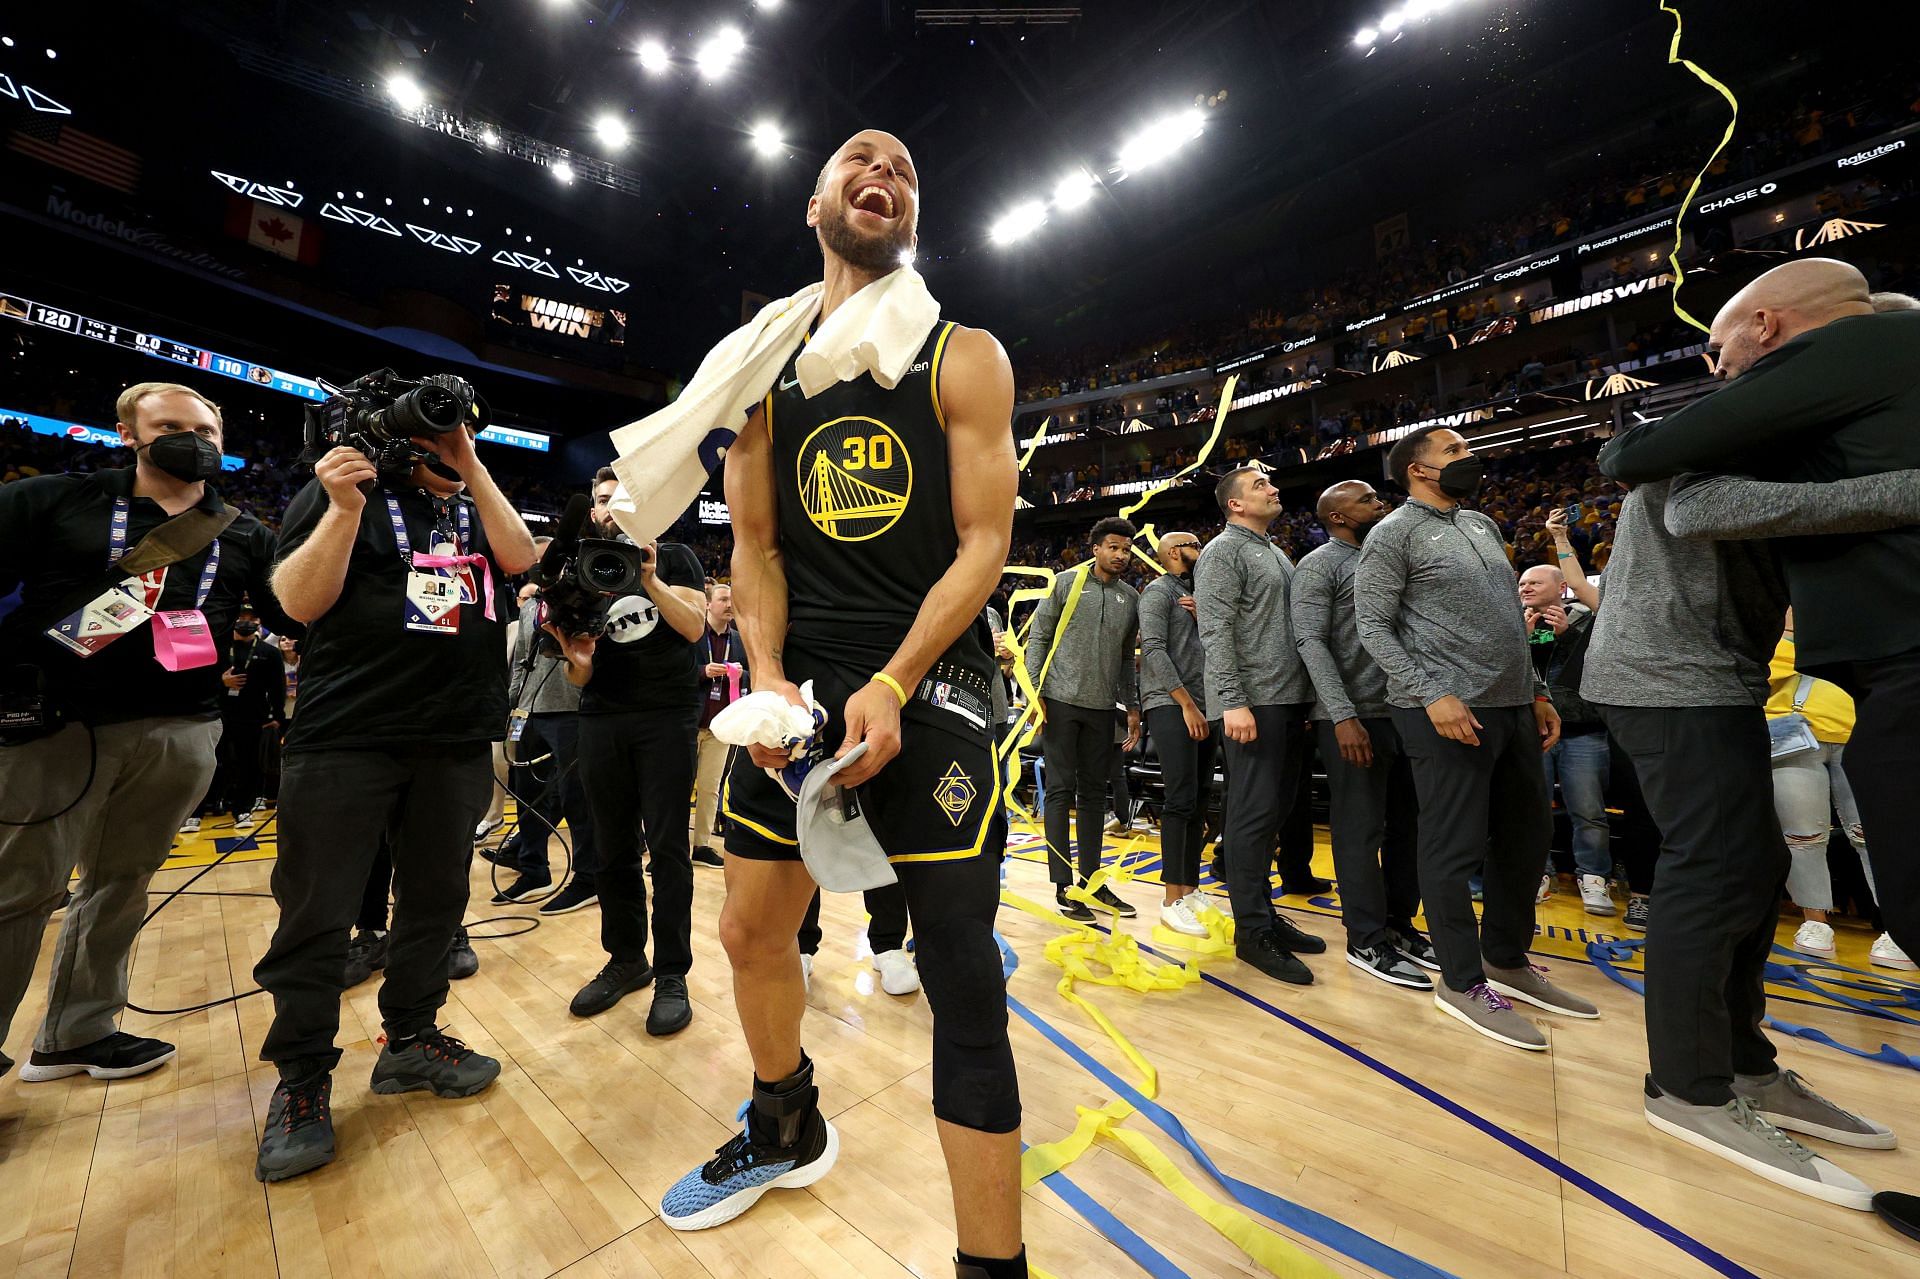 Steph Curry of the Golden State Warriors celebrates after the 120-110 win against the Dallas Mavericks in Game 5 of the Western Conference finals to advance to the NBA Finals on Thursday in San Francisco, California.